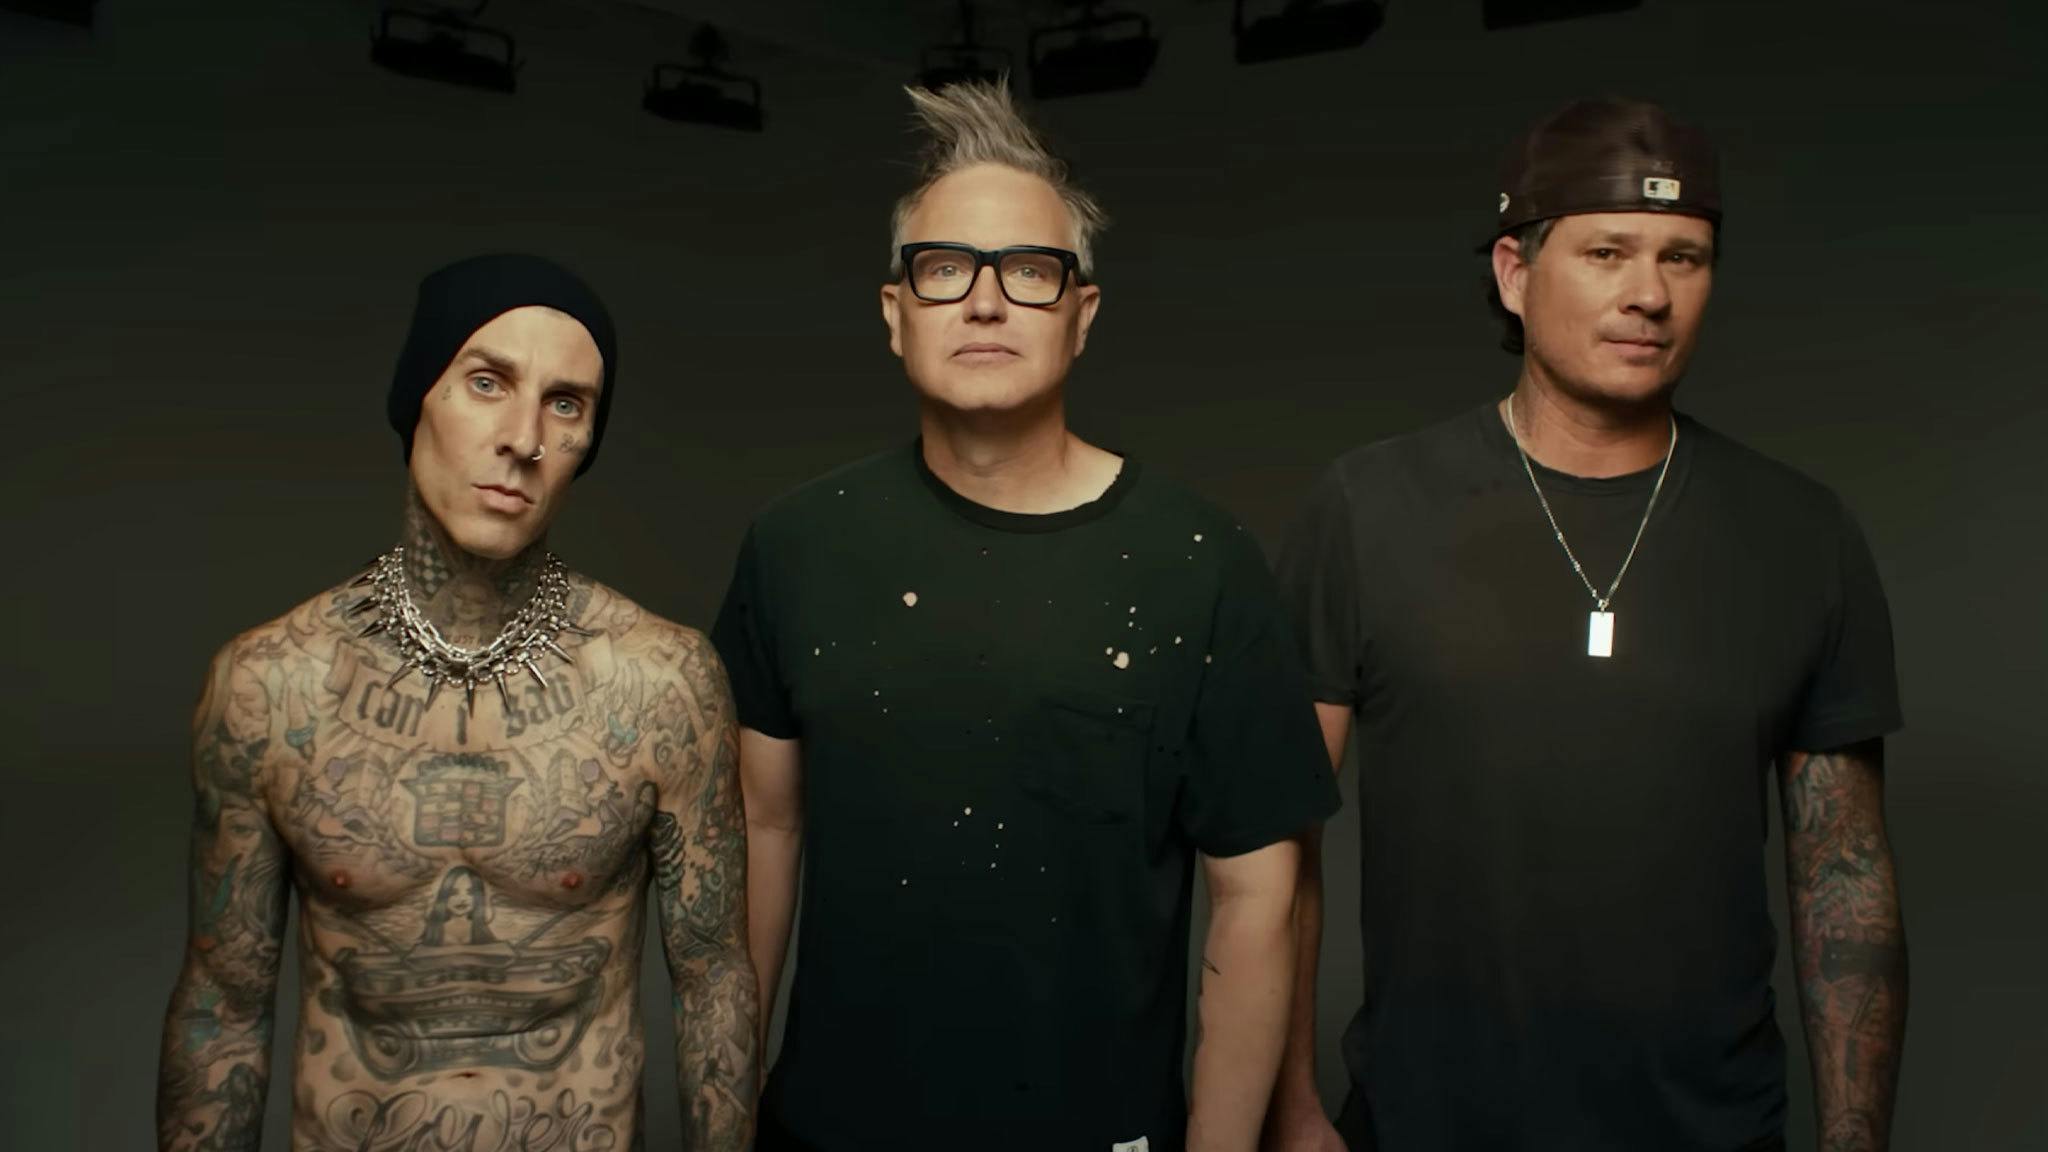 blink-182 share snippet of unheard new song… and the lyrics are classic blink